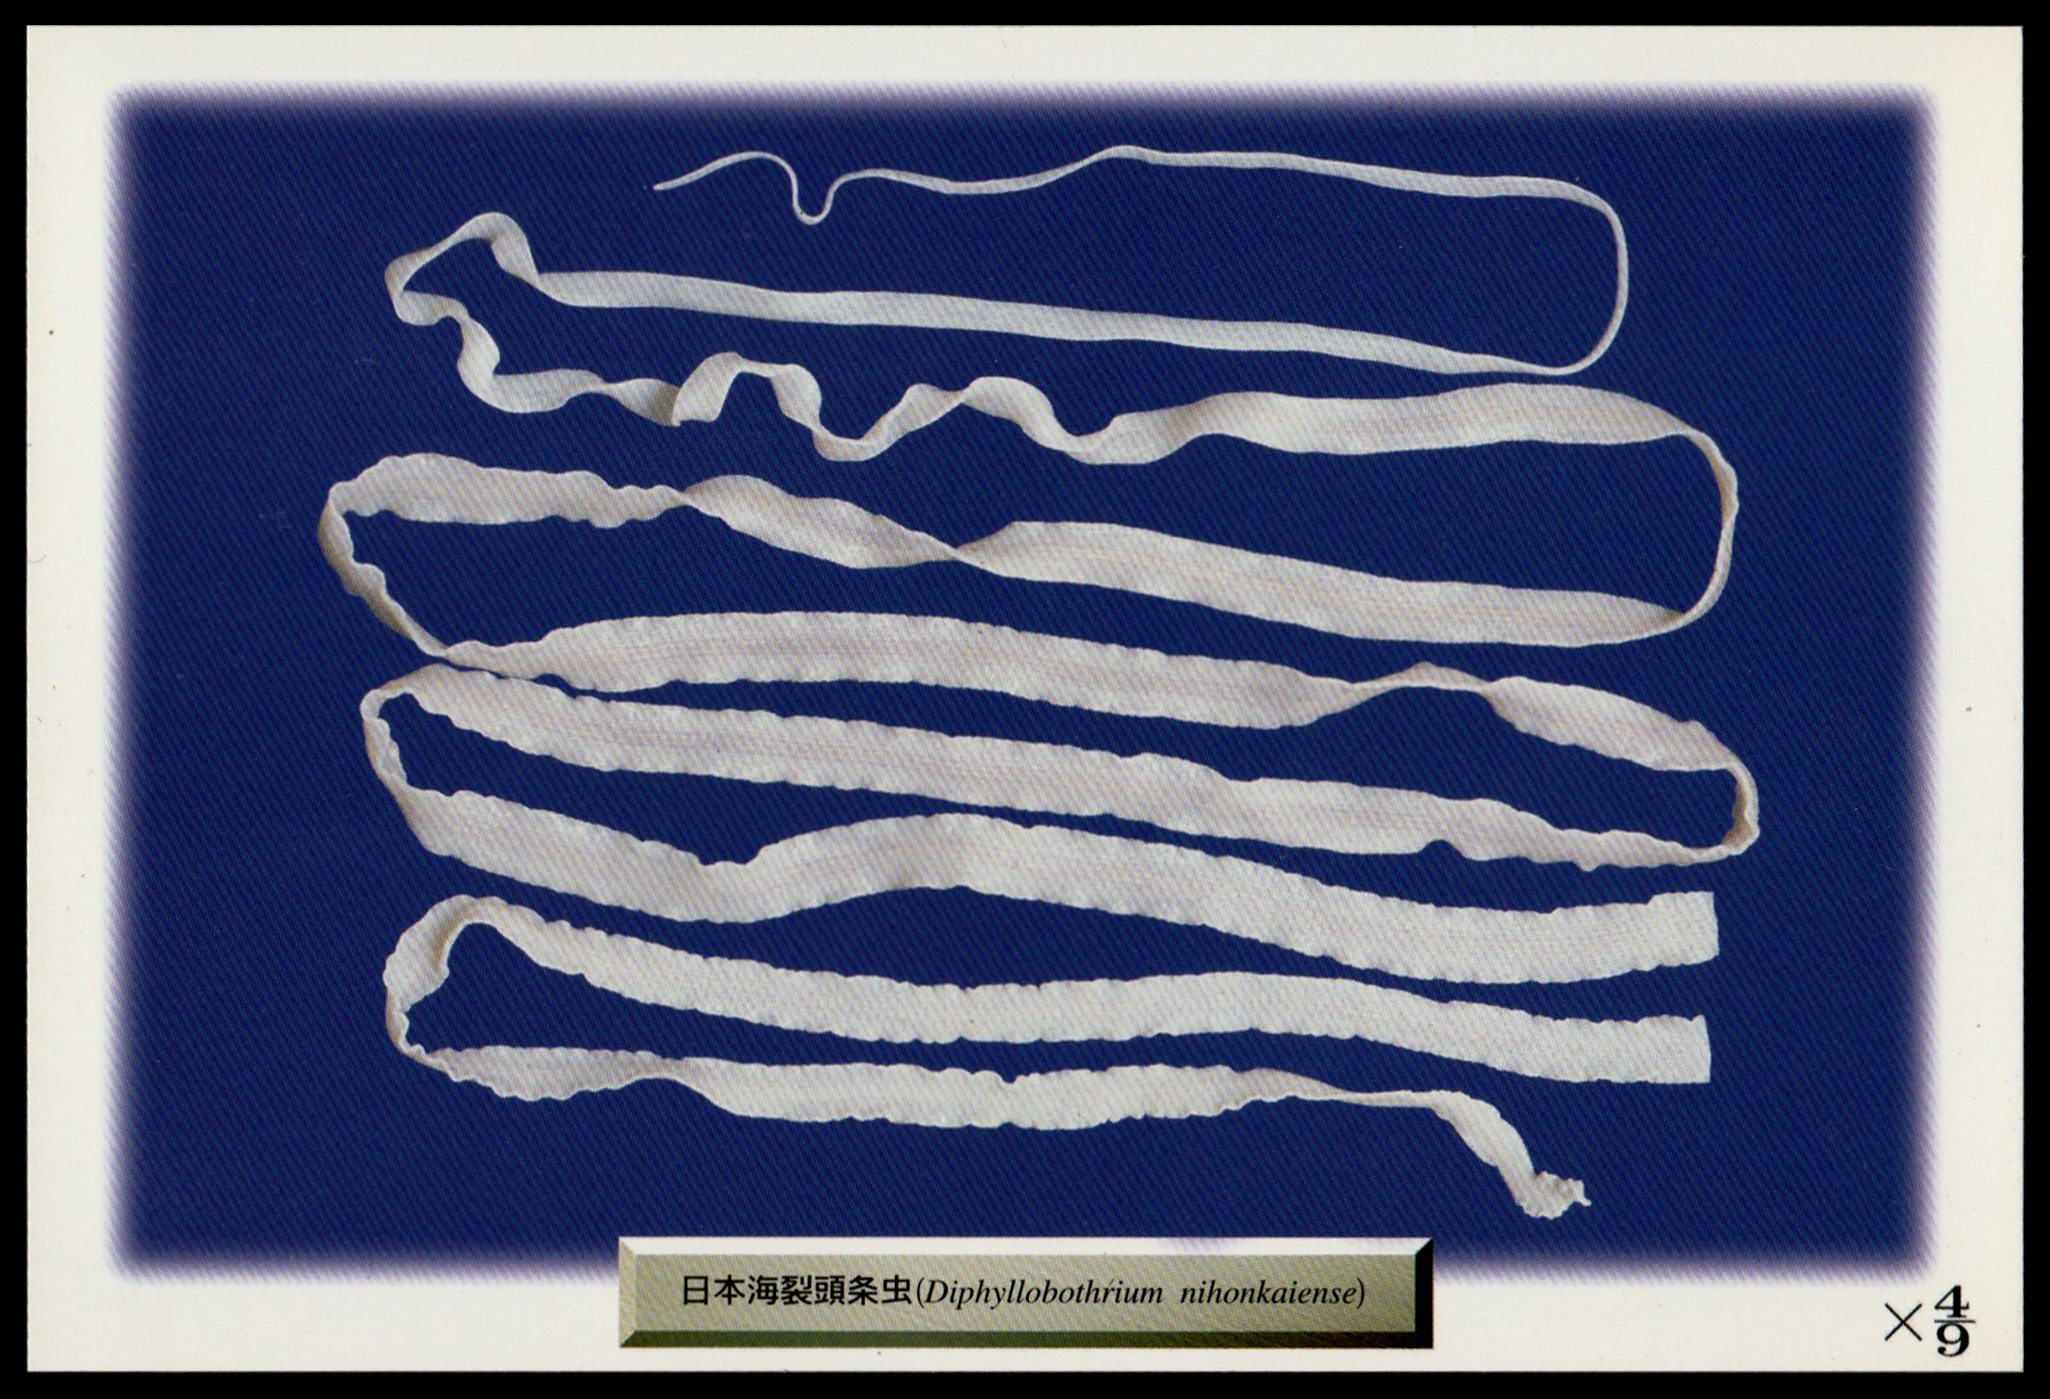 Postcard of an 8.8 meter (28.87 foot) tapeworm acquired through a visit to the Meguro Parasitological Museum in Tokyo. The museum's wall text in English reads, “A man in his 40s found a piece of a tapeworm coming out when defecated. He had developed no symptoms since he after raw salmon since he ate raw salmon, infected with a larval cestode, 3 months previously. Dr. Satoru Kamegai, the first director of MOM, collected the whole worm, 8.8 m long, from the patient using an antiparasitic drug. It is amazing to think how fast this tapeworm grew inside a human body."